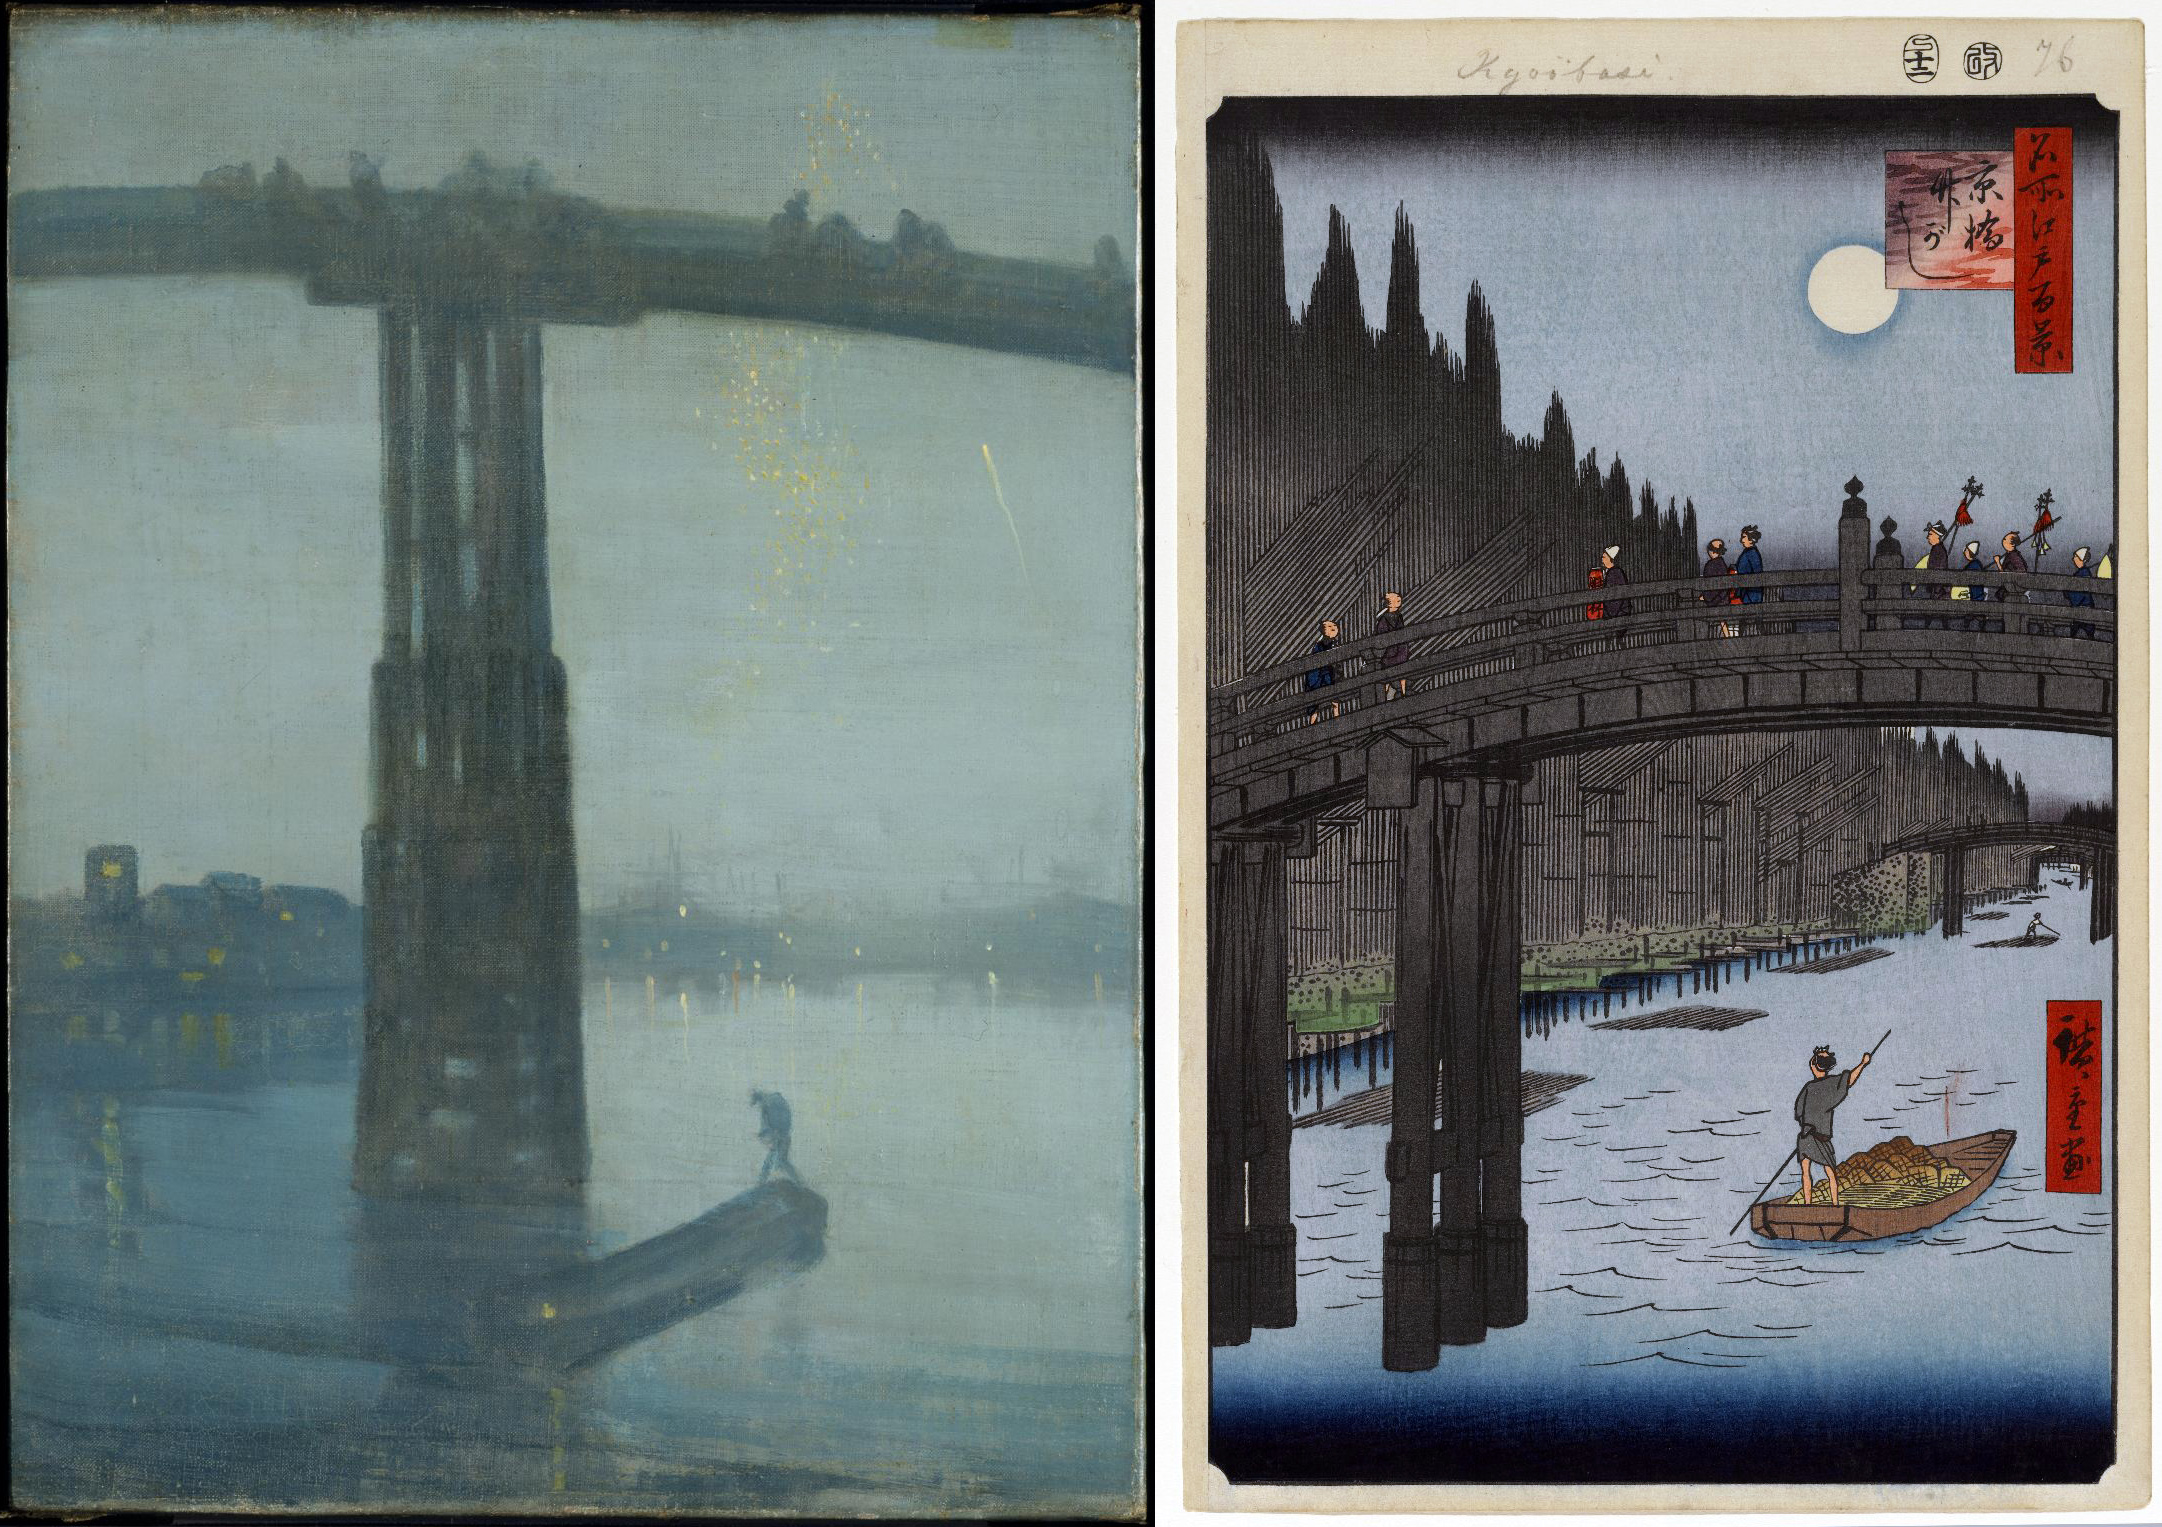 Left: James McNeill Whistler, Nocturne: Blue and Gold – Old Battersea Bridge, 1872-5, oil on canvas, 68.3 x 51.2 cm (Tate Britain, London); Right: Utagawa Hiroshige, Bamboo Yards, Kyobashi Bridge from One Hundred Views of Edo, 1857, woodblock print, 36 x 23.5 cm (Brooklyn Museum)